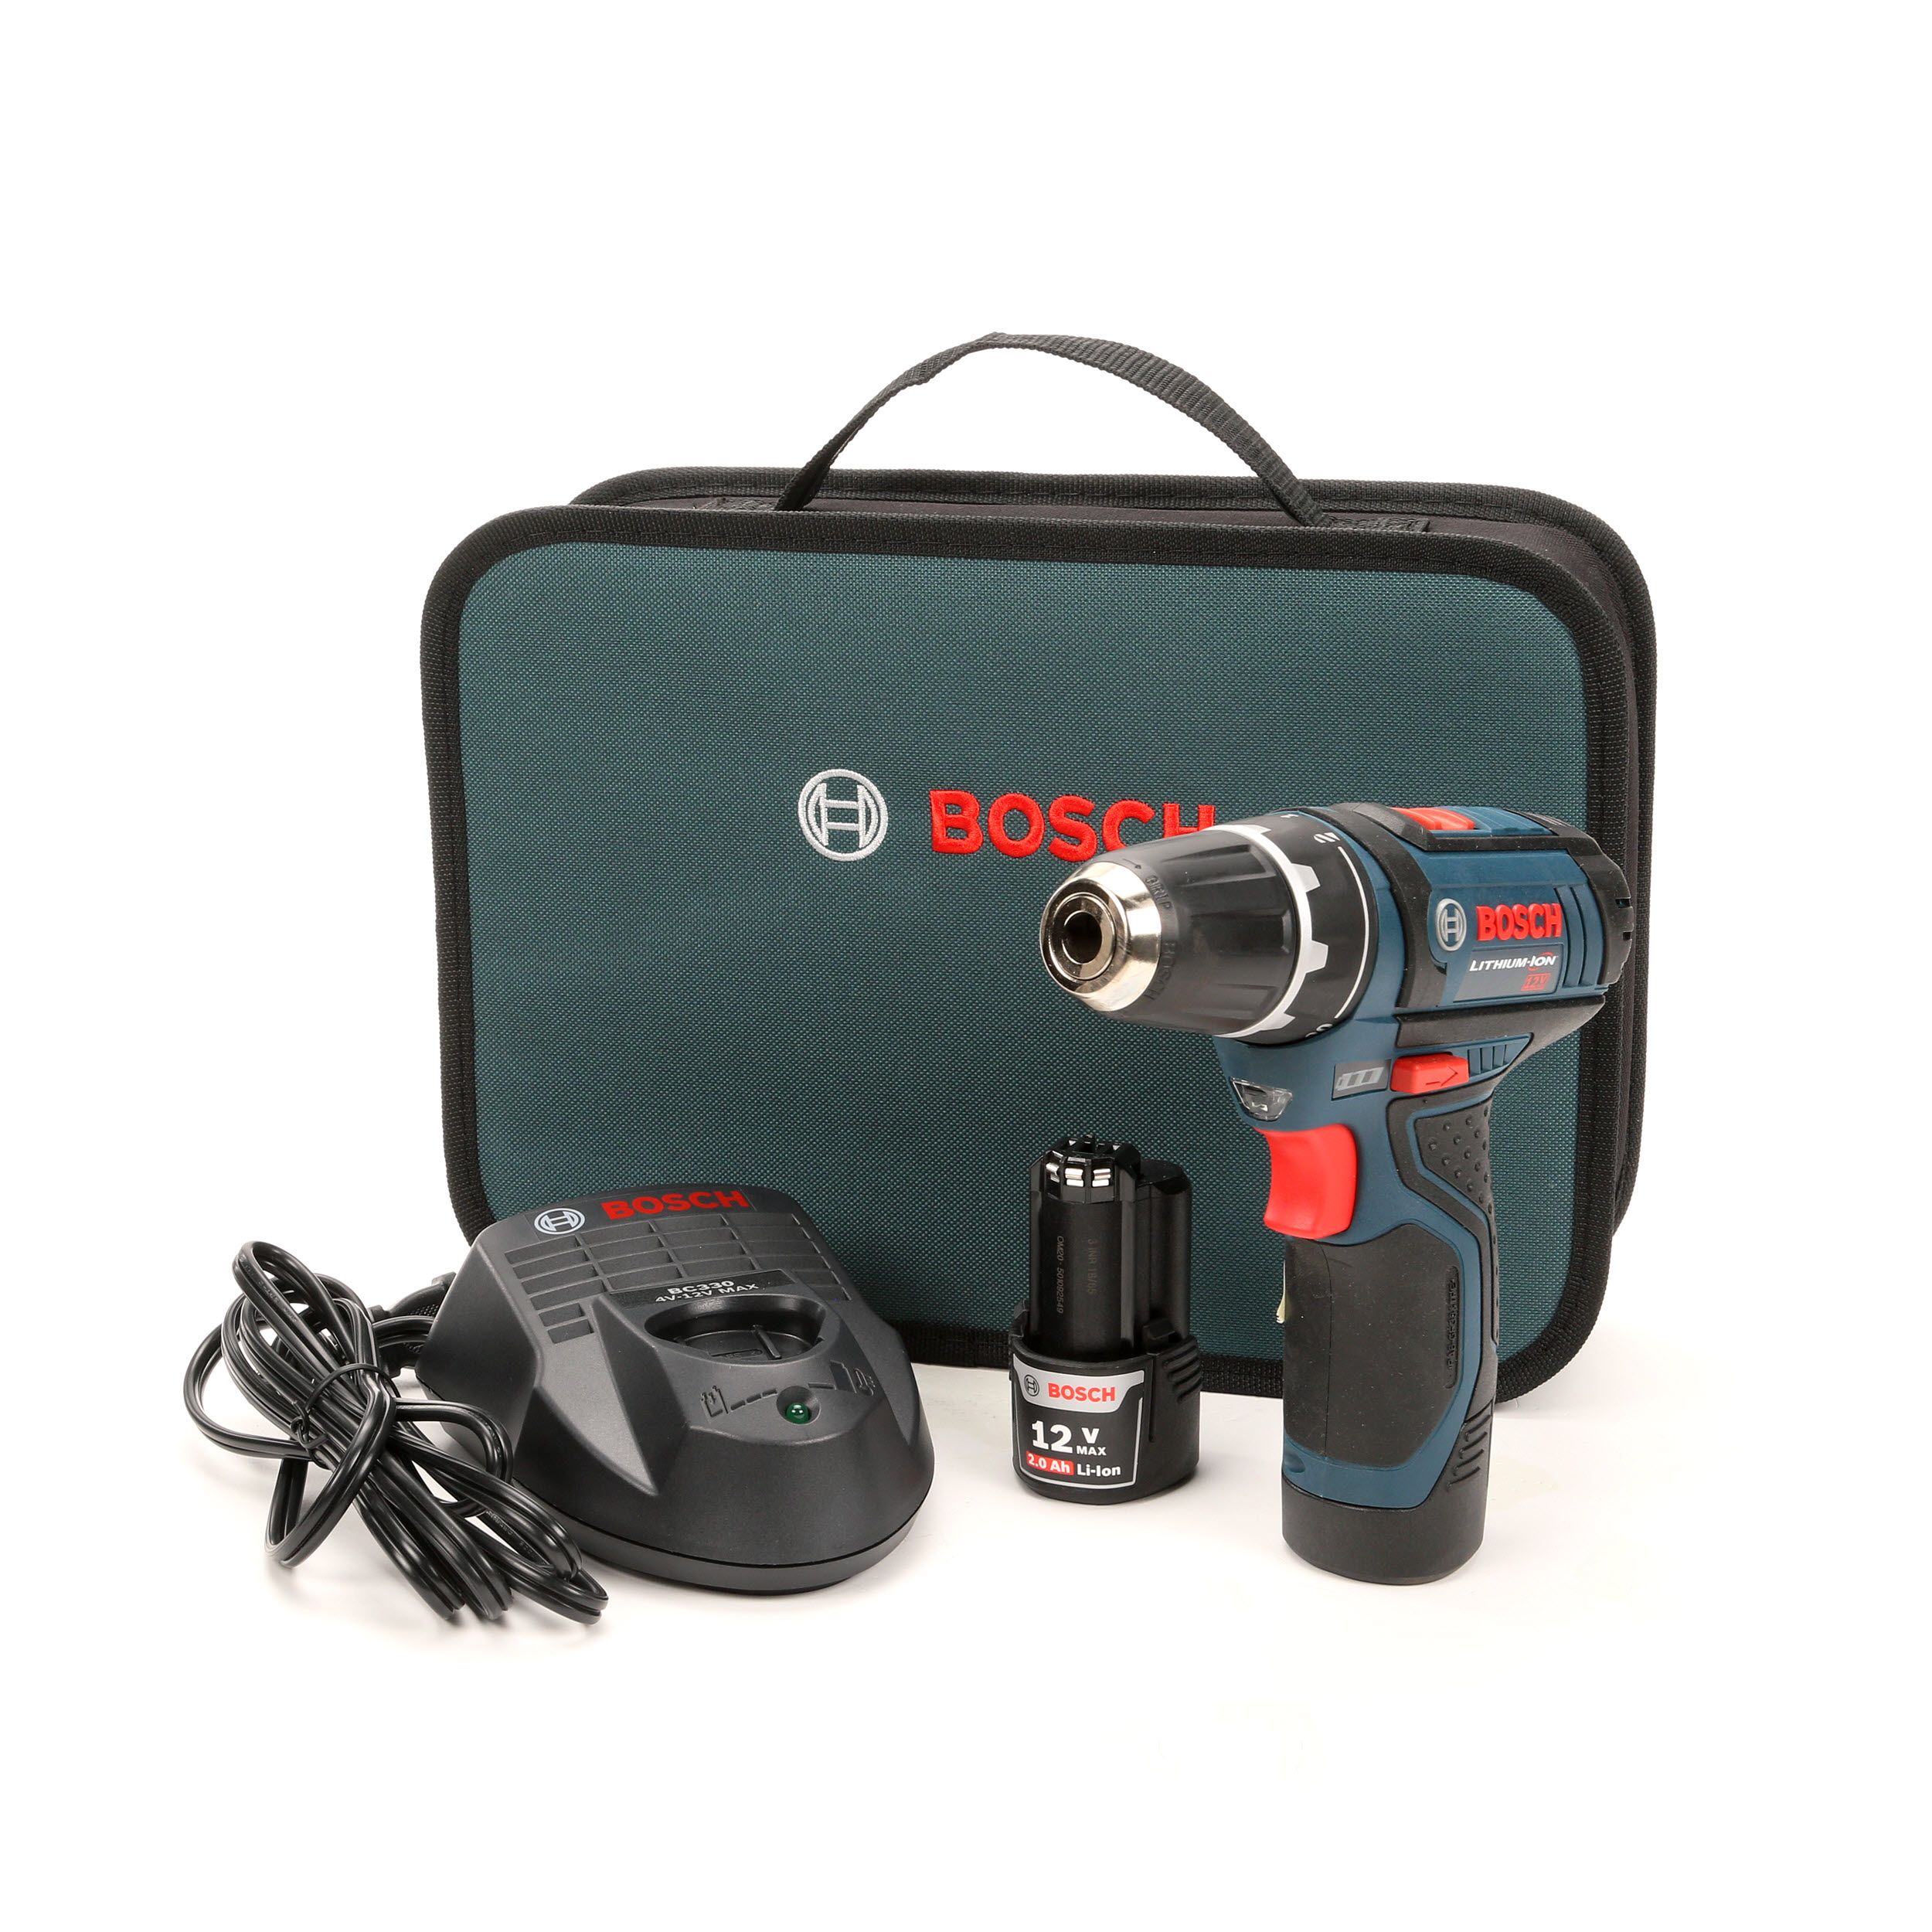 Bosch 3615 3/8" Drill/driver With Charger for sale online 